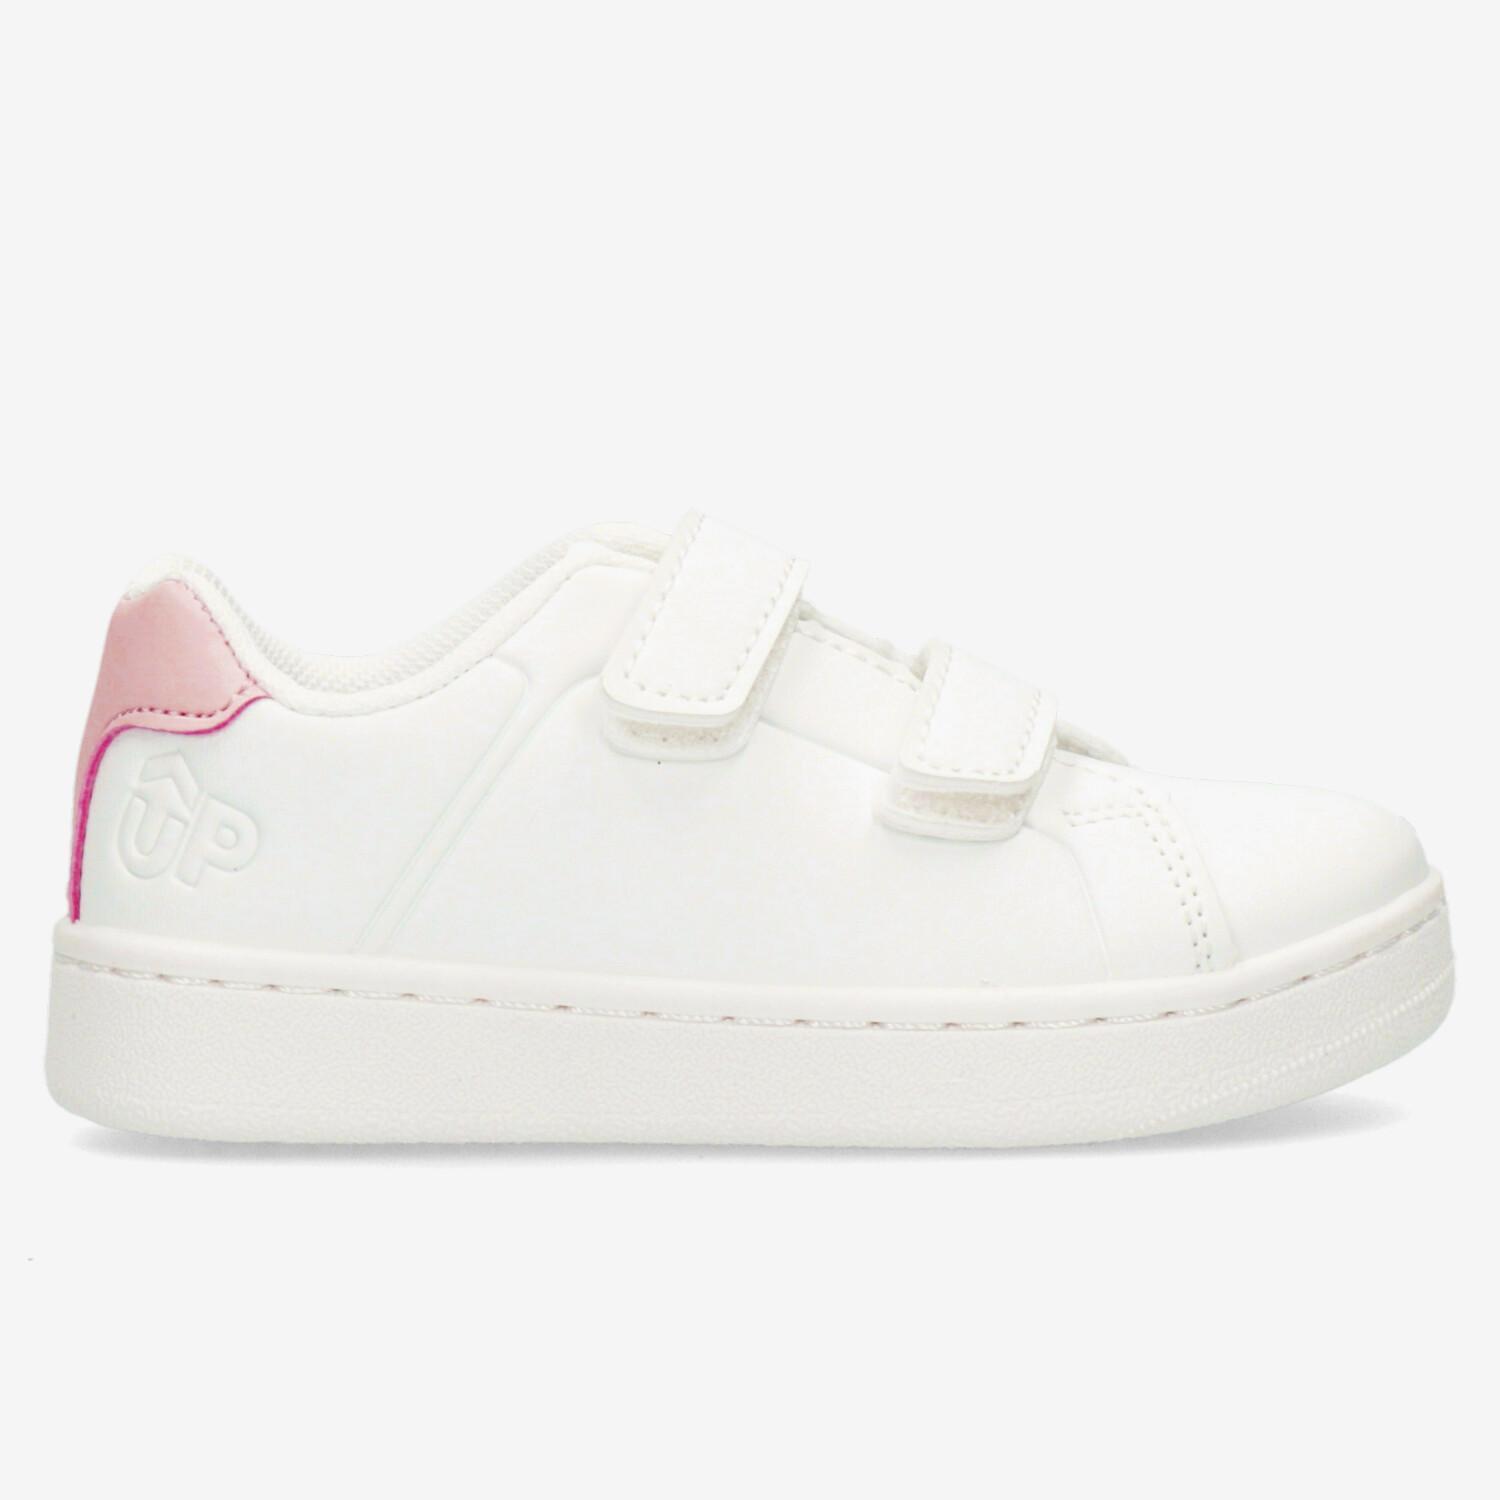 Up Arena - Blanc - Chaussures Velcro Fille sports taille 19